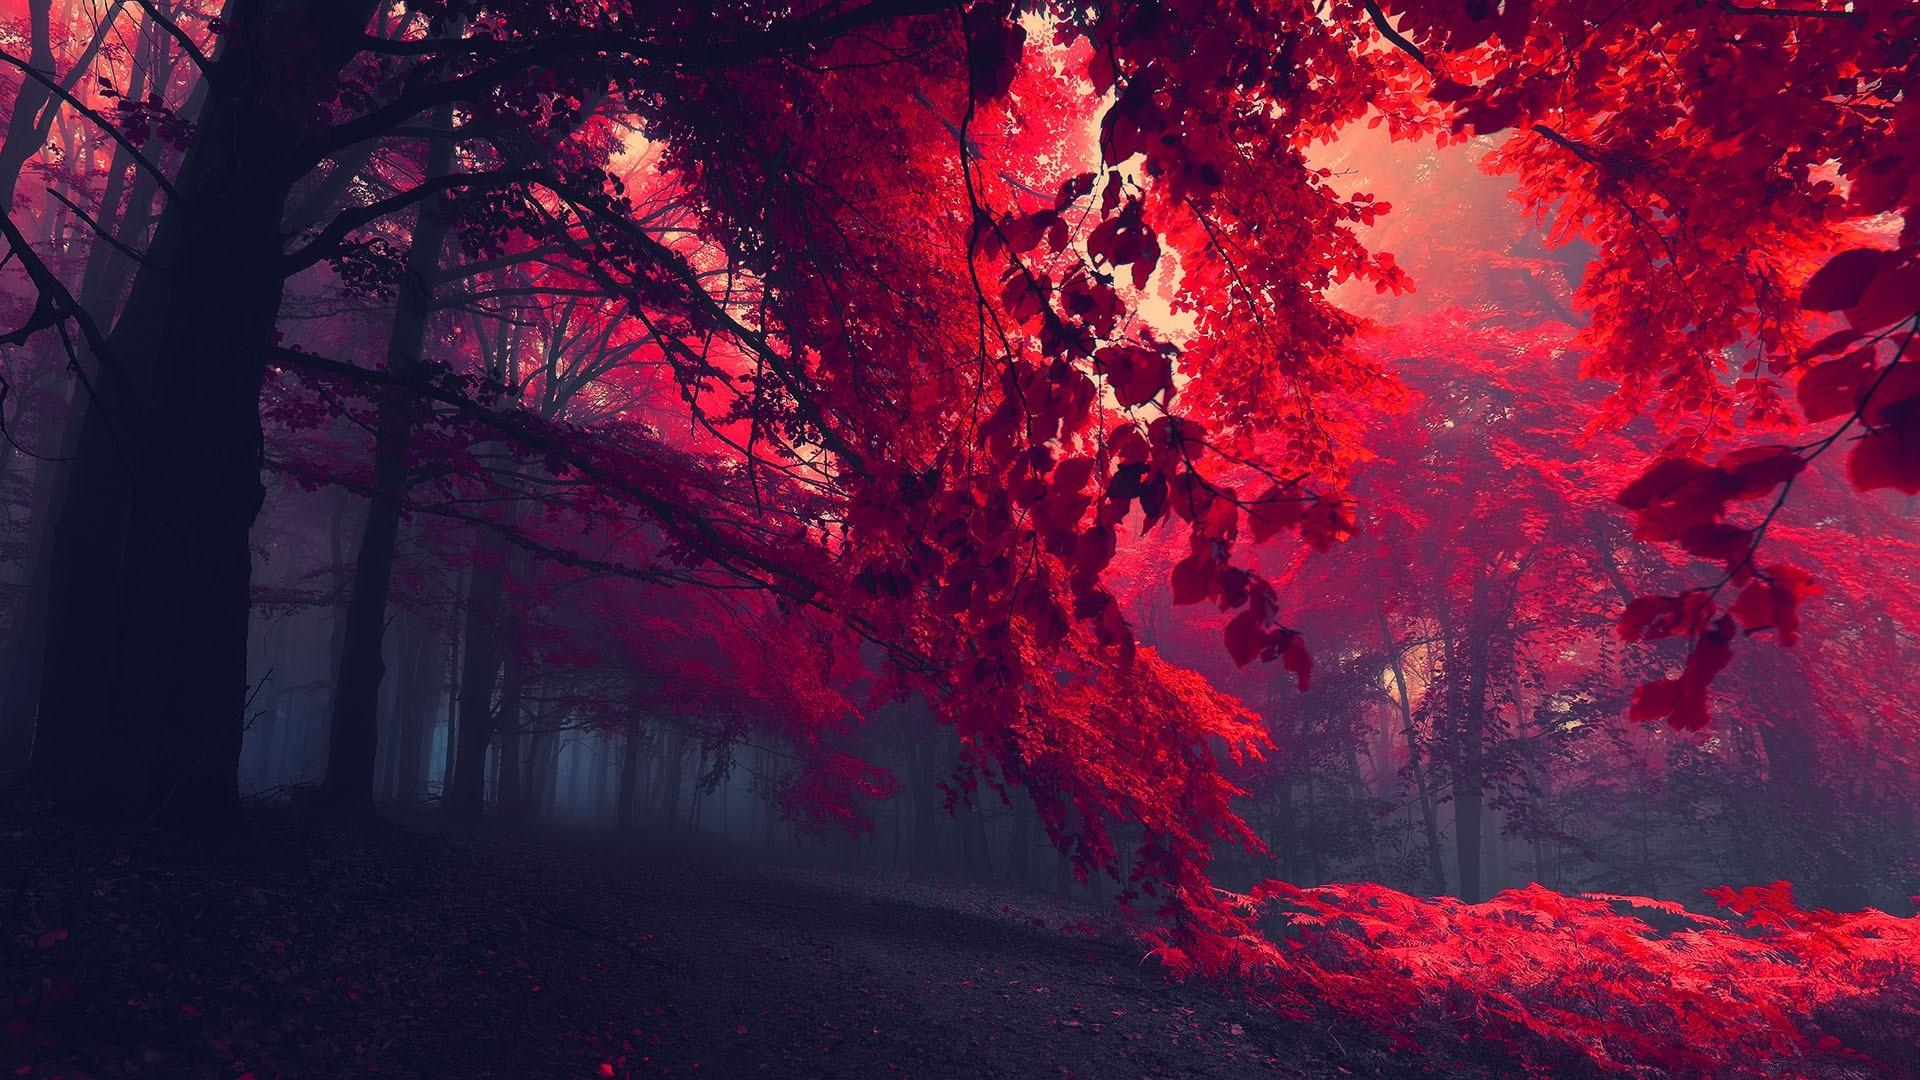 Red trees 4K HD quality wall paper - www.gnome-look.org